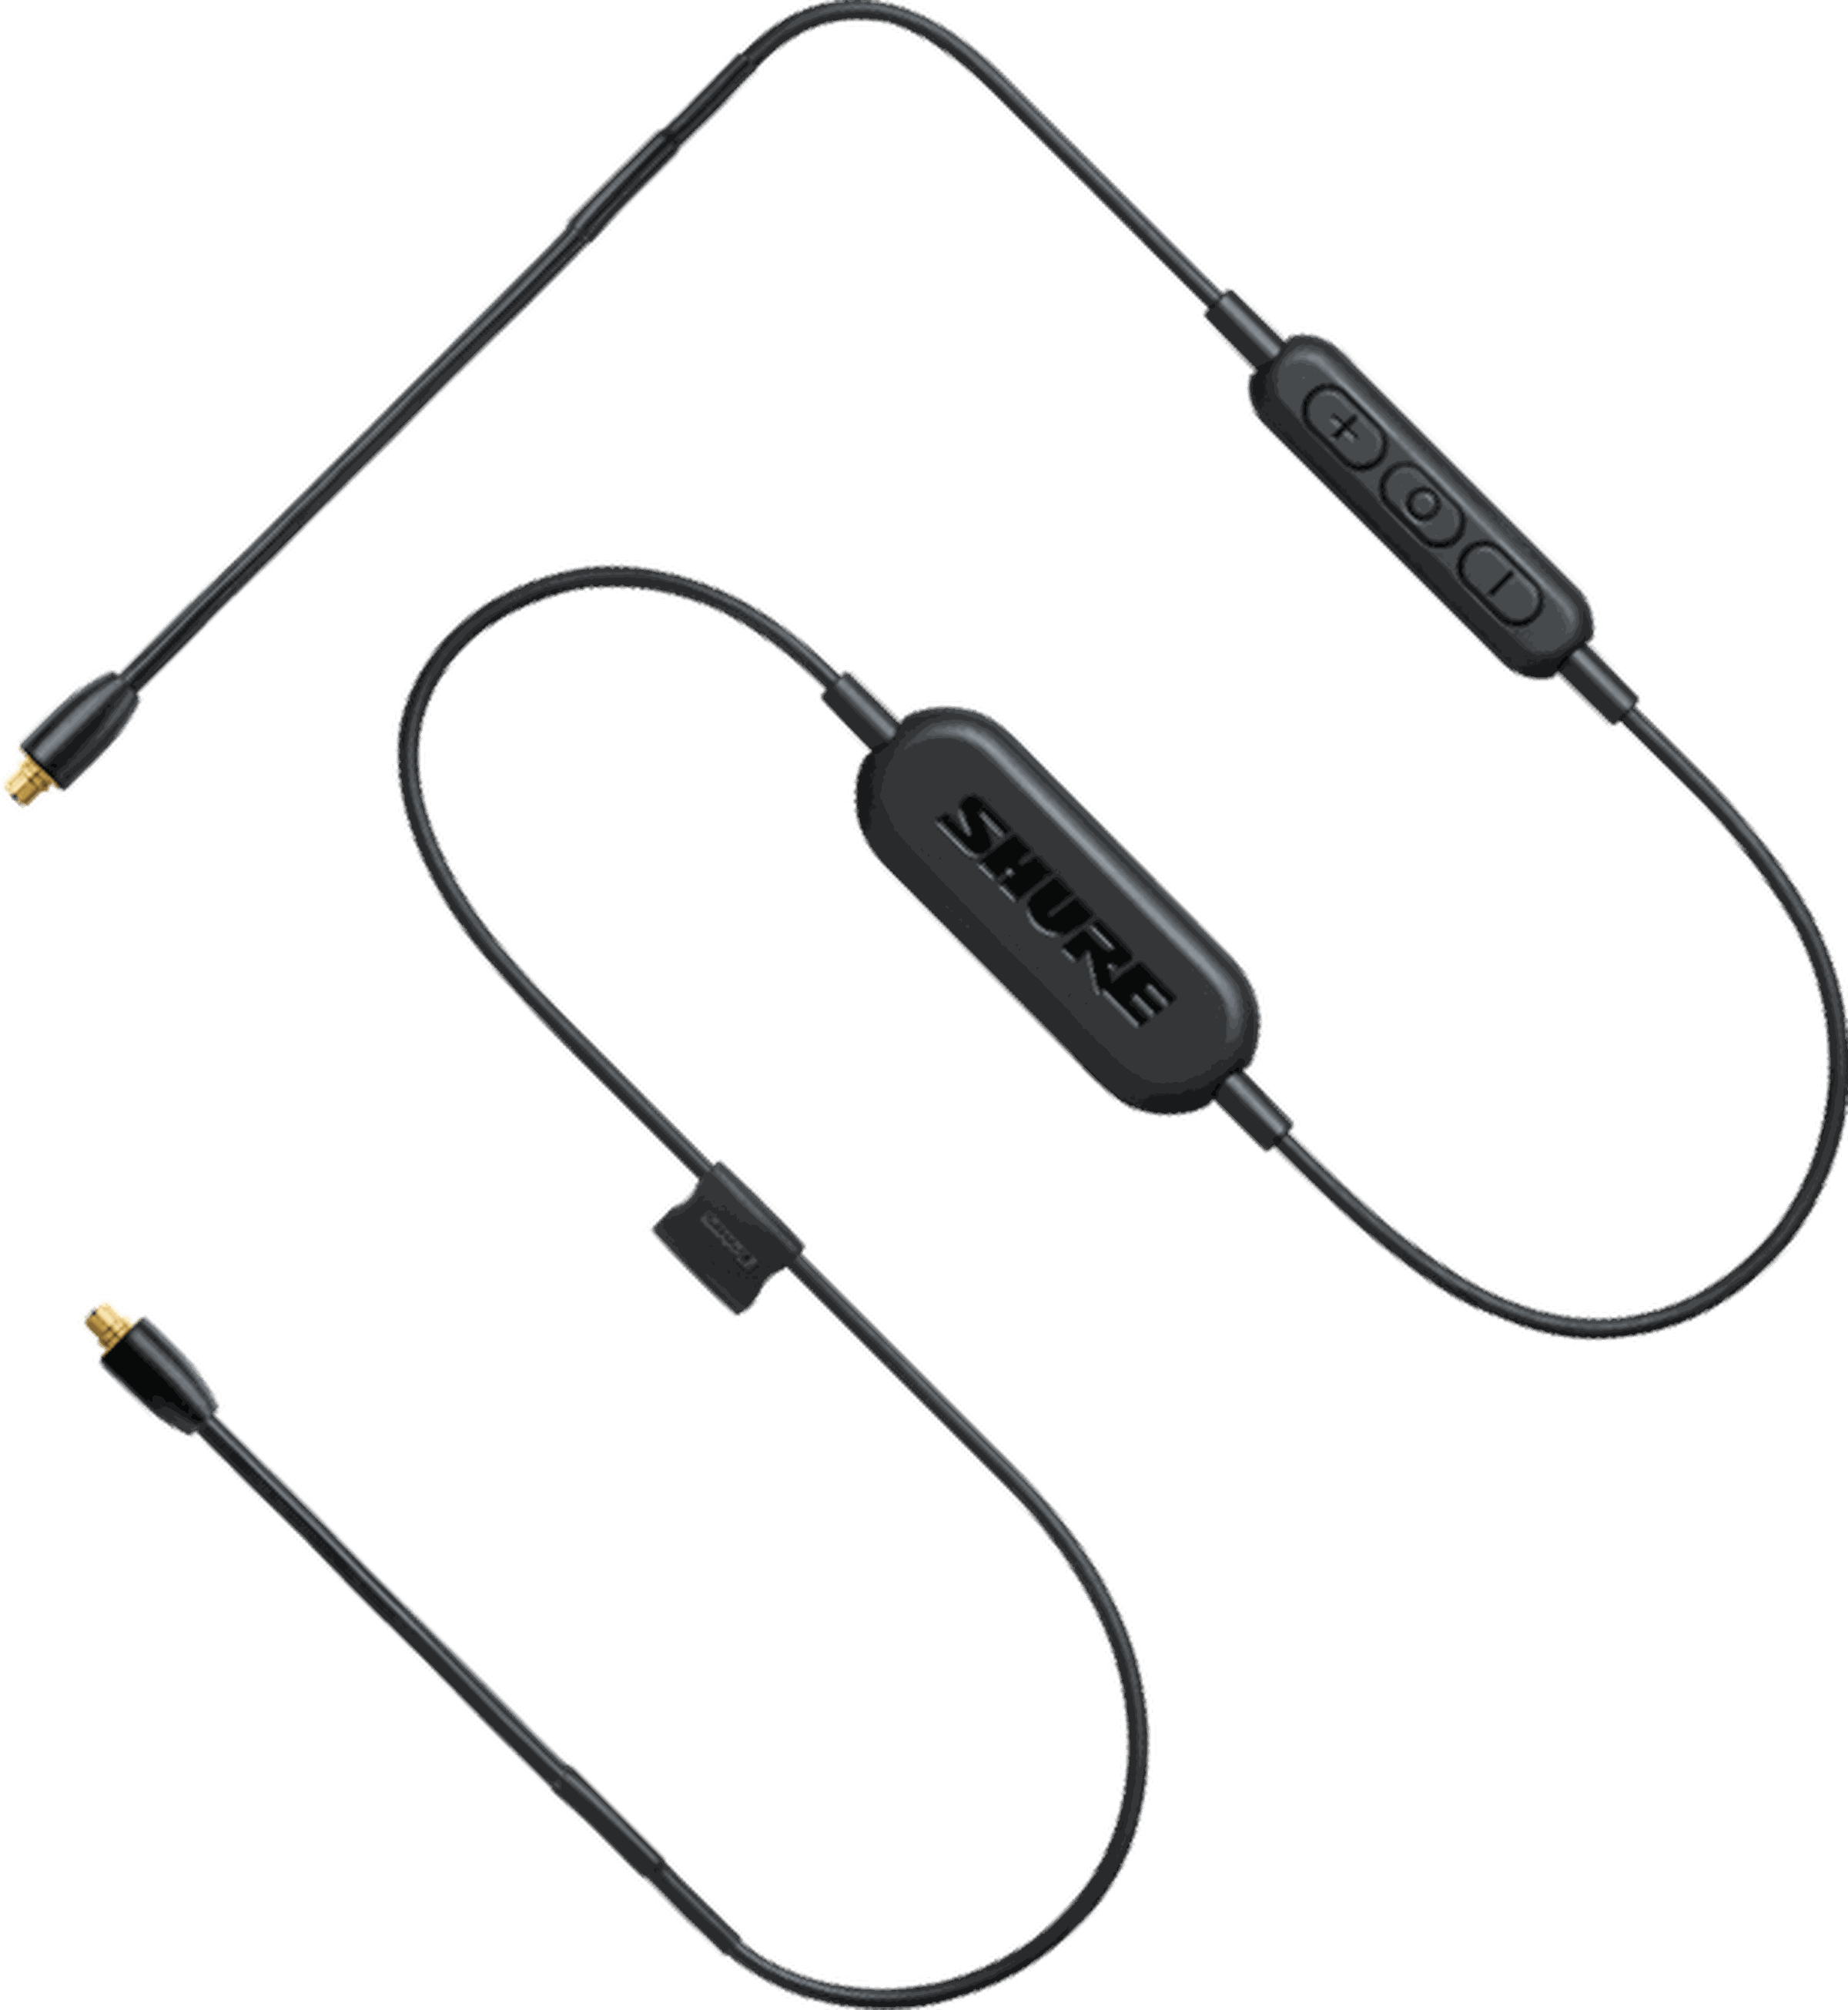 Shure’s $99 Bluetooth Connection Cable features built-in music controls.